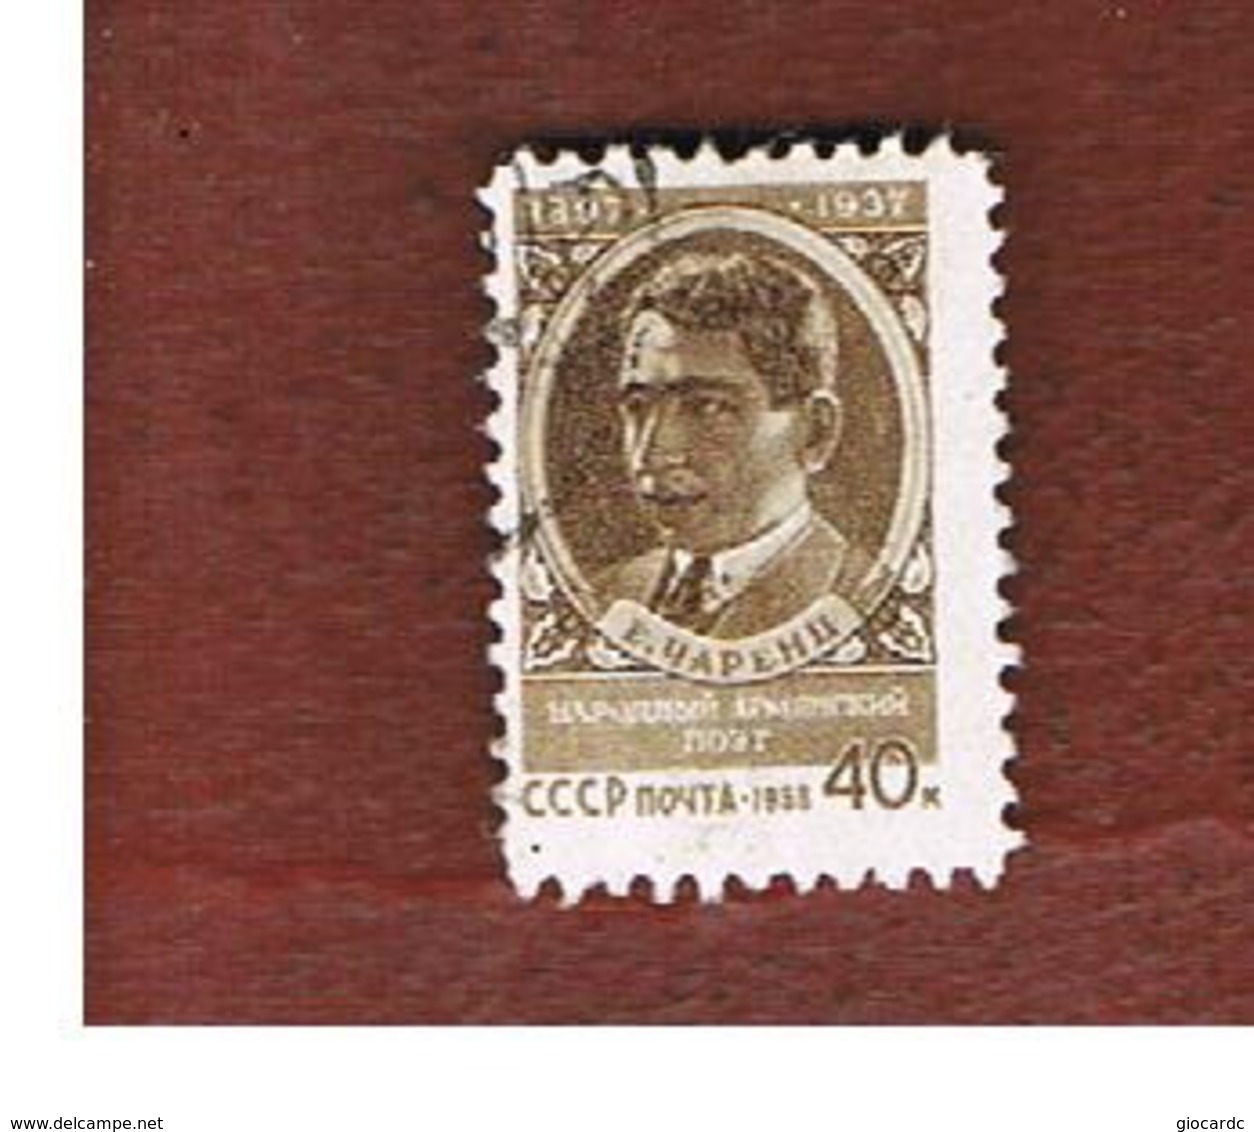 URSS -   SG 2178  -  1958 E. CHARENTS, POET -  USED °   RIF. CP - Gebraucht